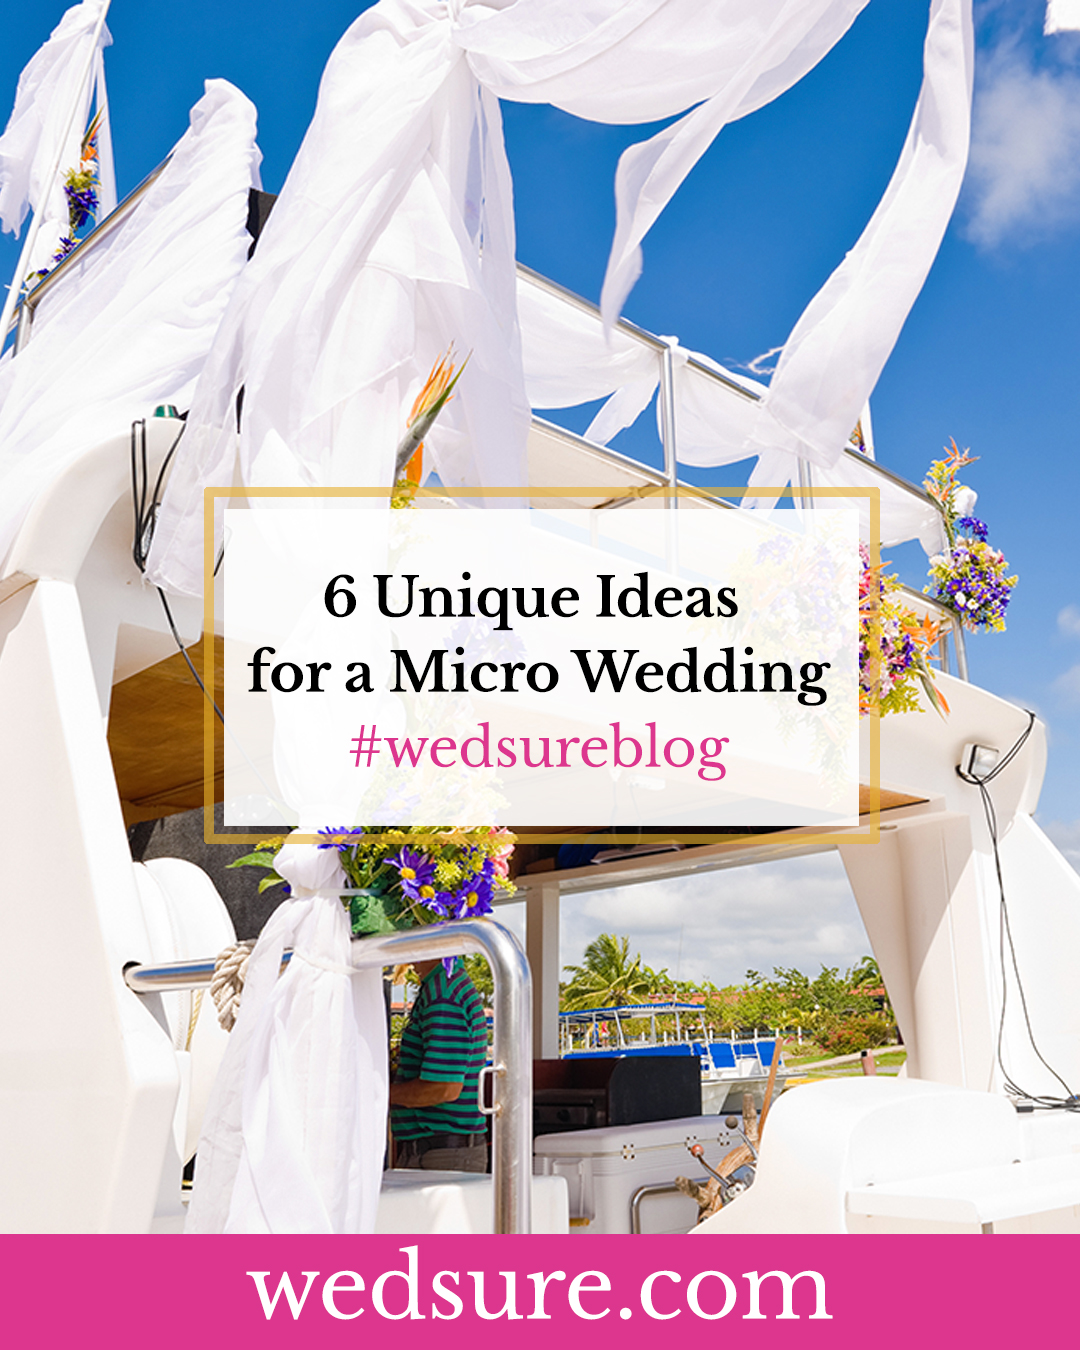 6 Unique Places to Have a Micro Wedding